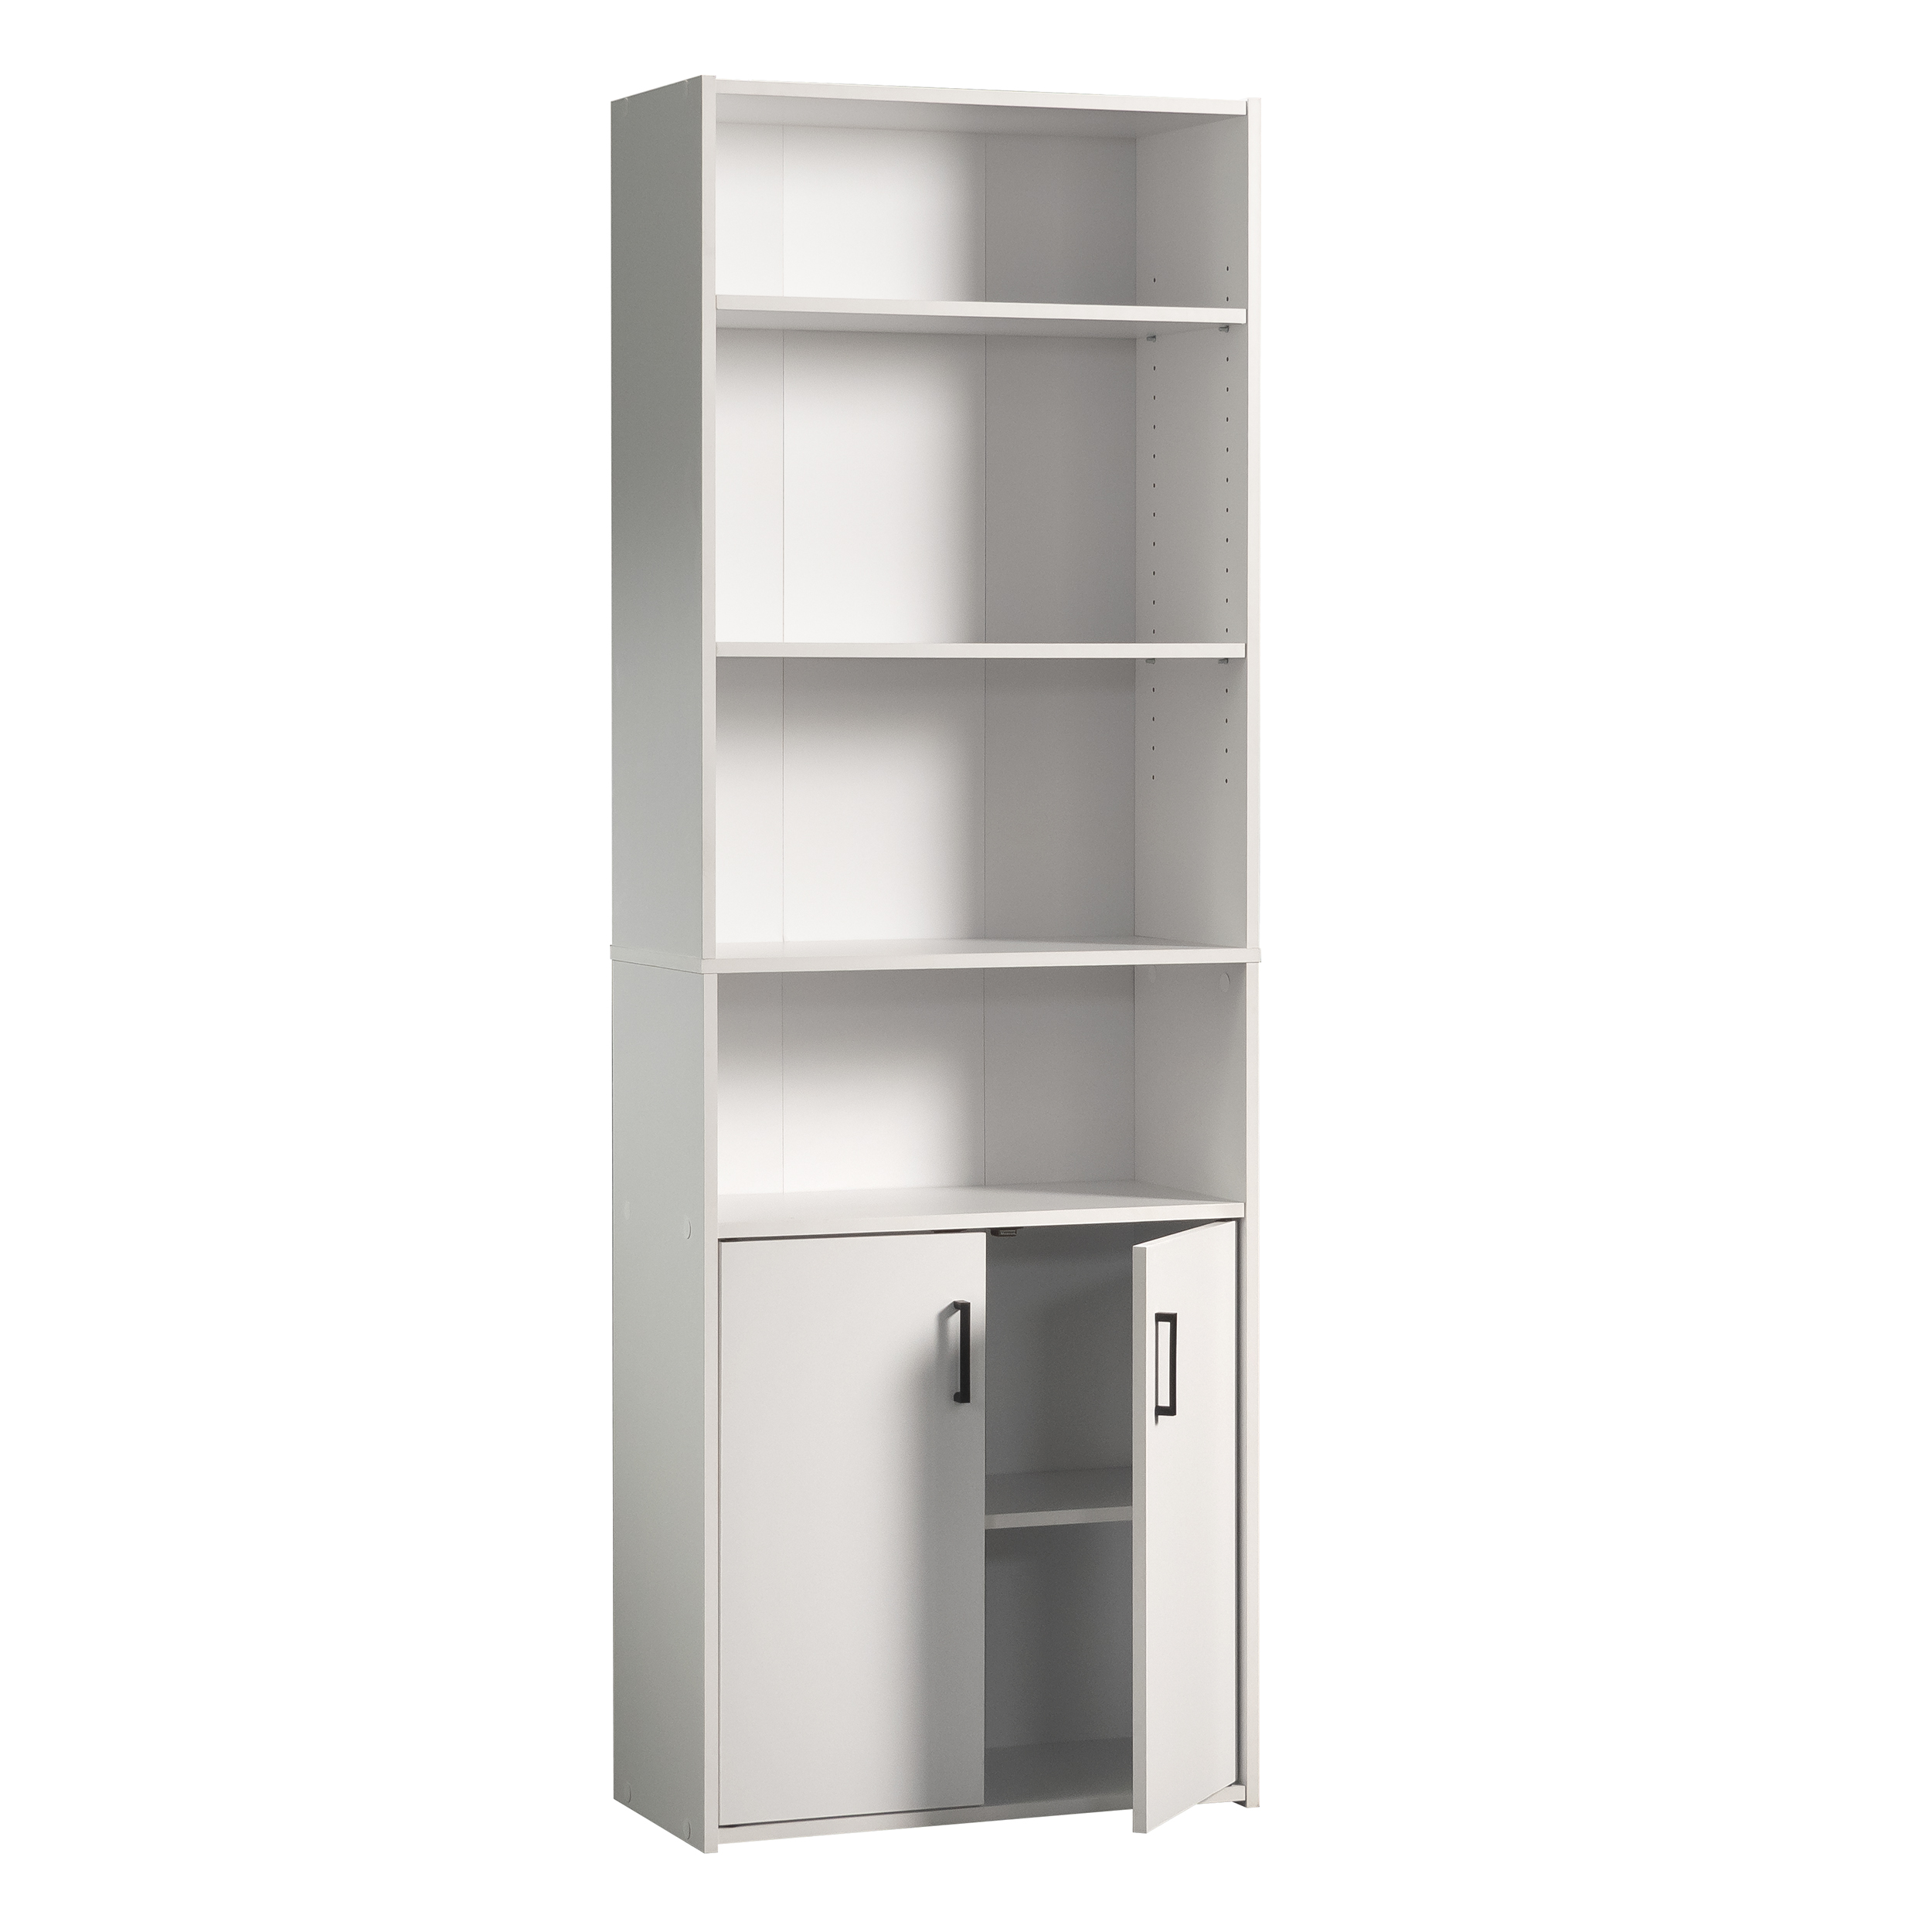 Mainstays Traditional 5 Shelf Bookcase with Doors, Soft White - image 2 of 5